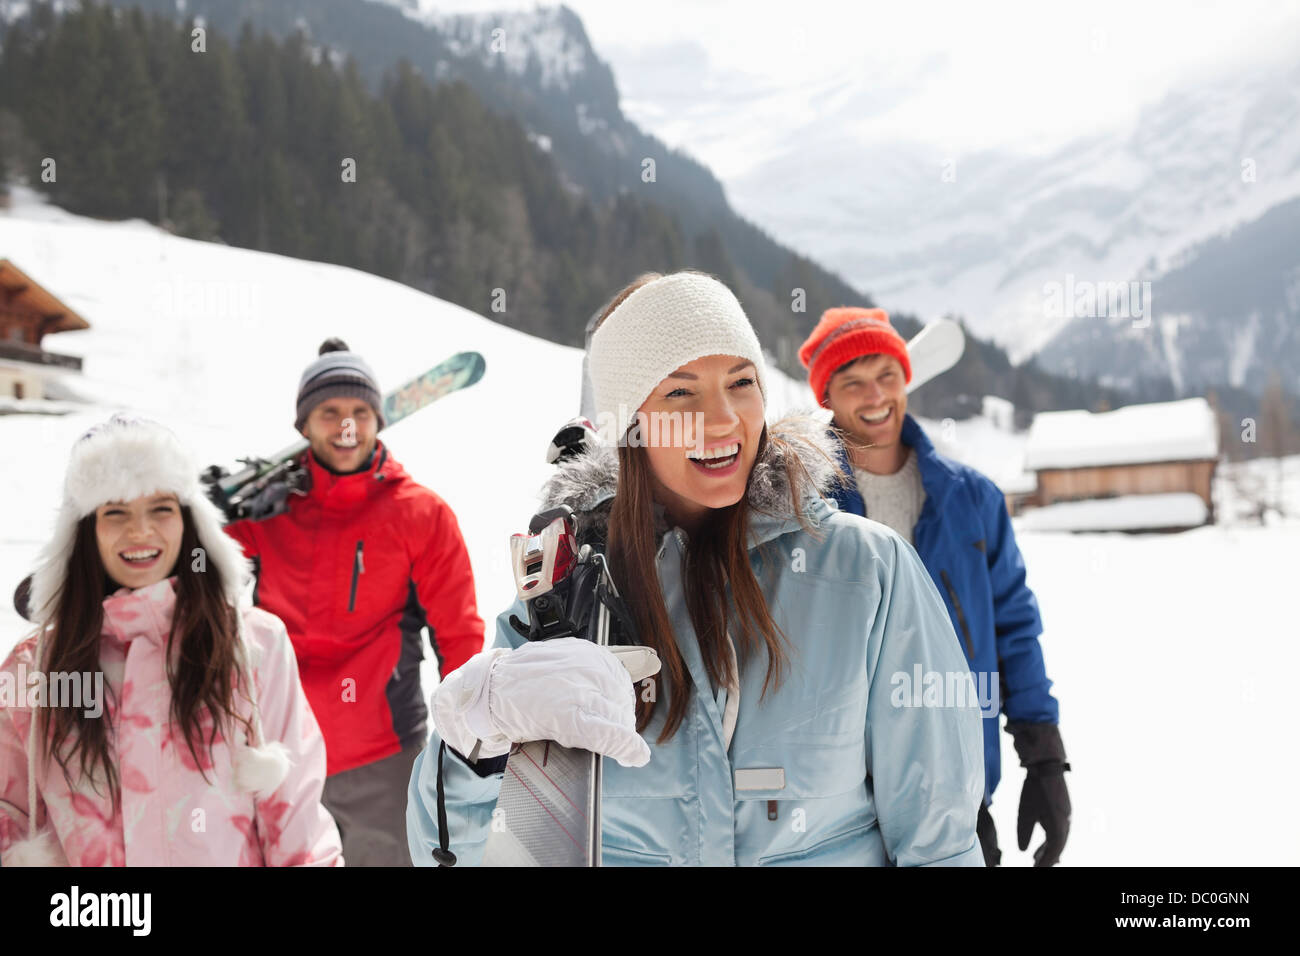 Happy friends carrying skis in snowy field Stock Photo